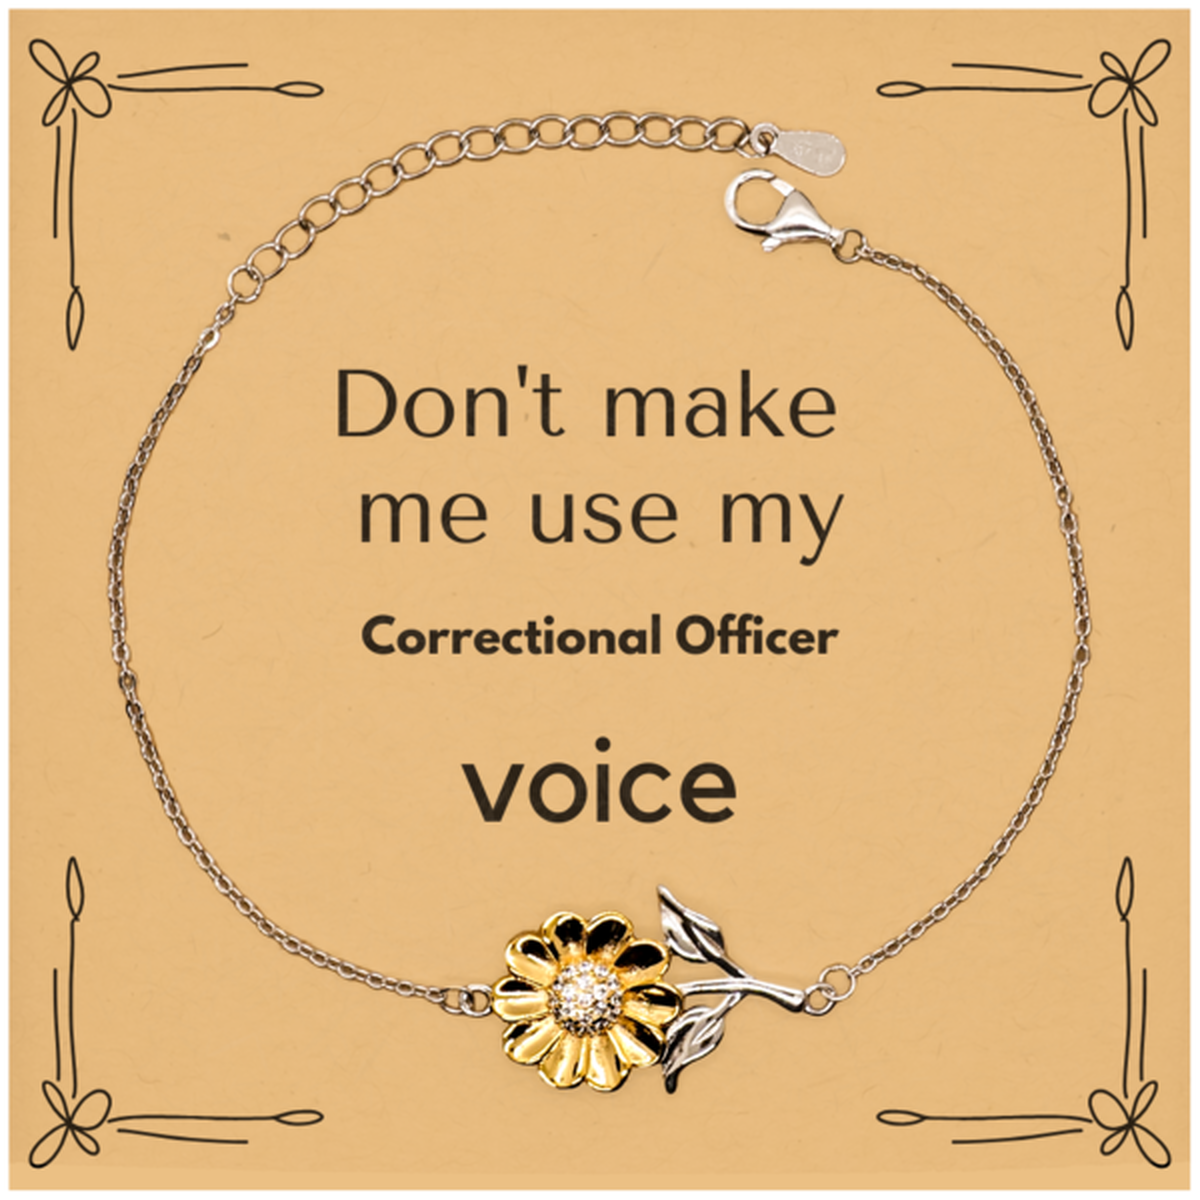 Don't make me use my Correctional Officer voice, Sarcasm Correctional Officer Card Gifts, Christmas Correctional Officer Sunflower Bracelet Birthday Unique Gifts For Correctional Officer Coworkers, Men, Women, Colleague, Friends